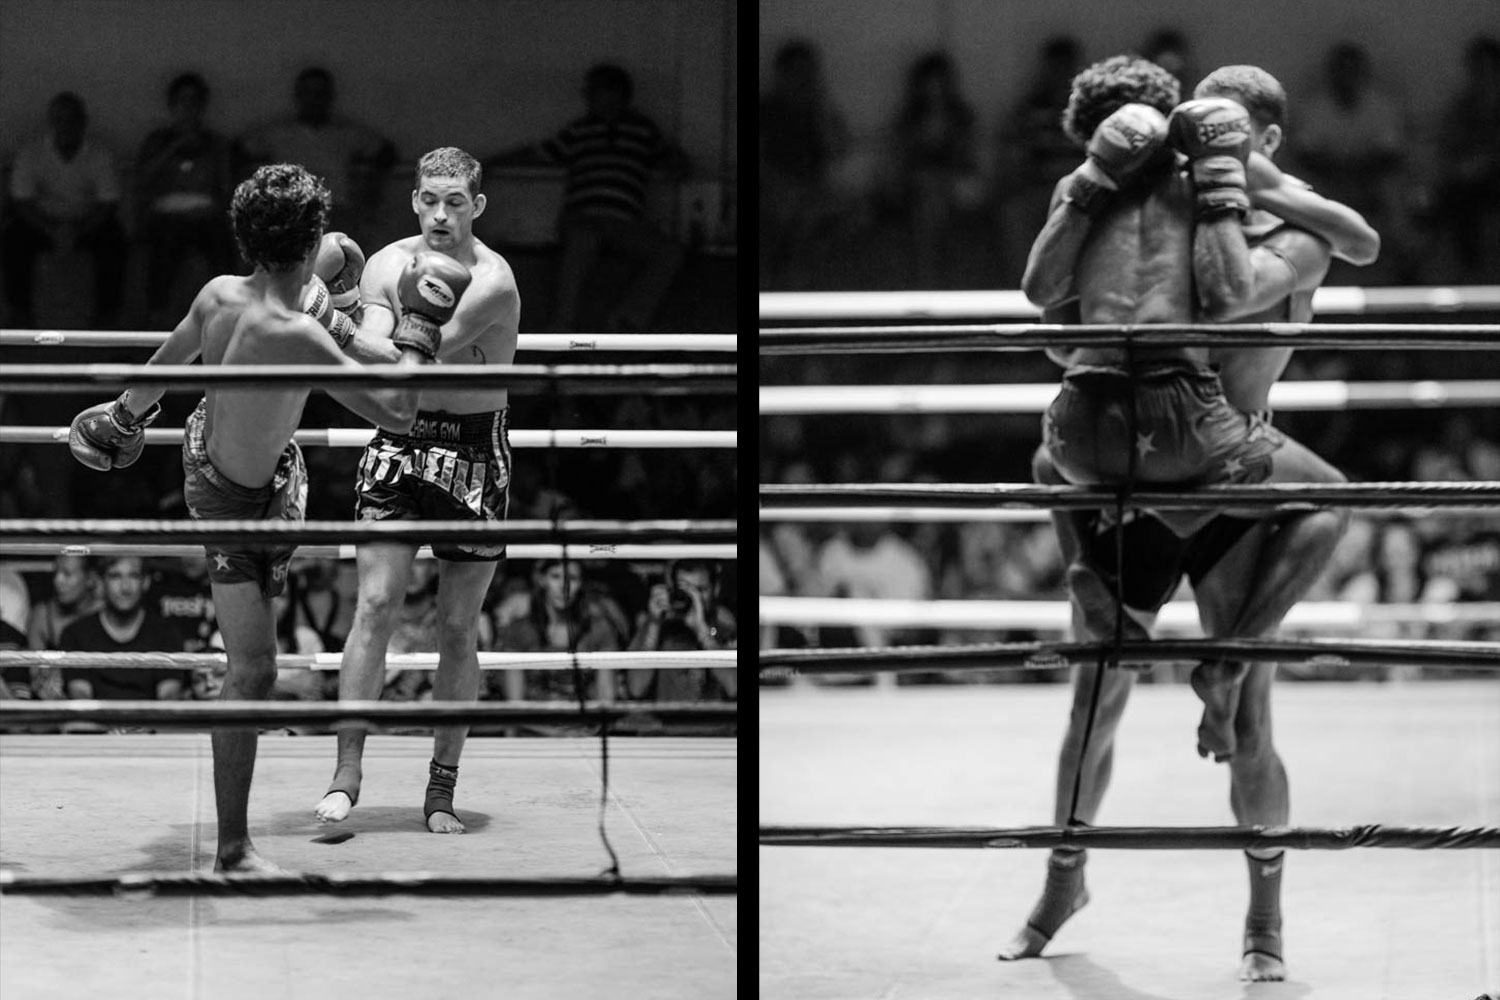 Muay Thai boxing fight between a westerner and a Thai national fighter